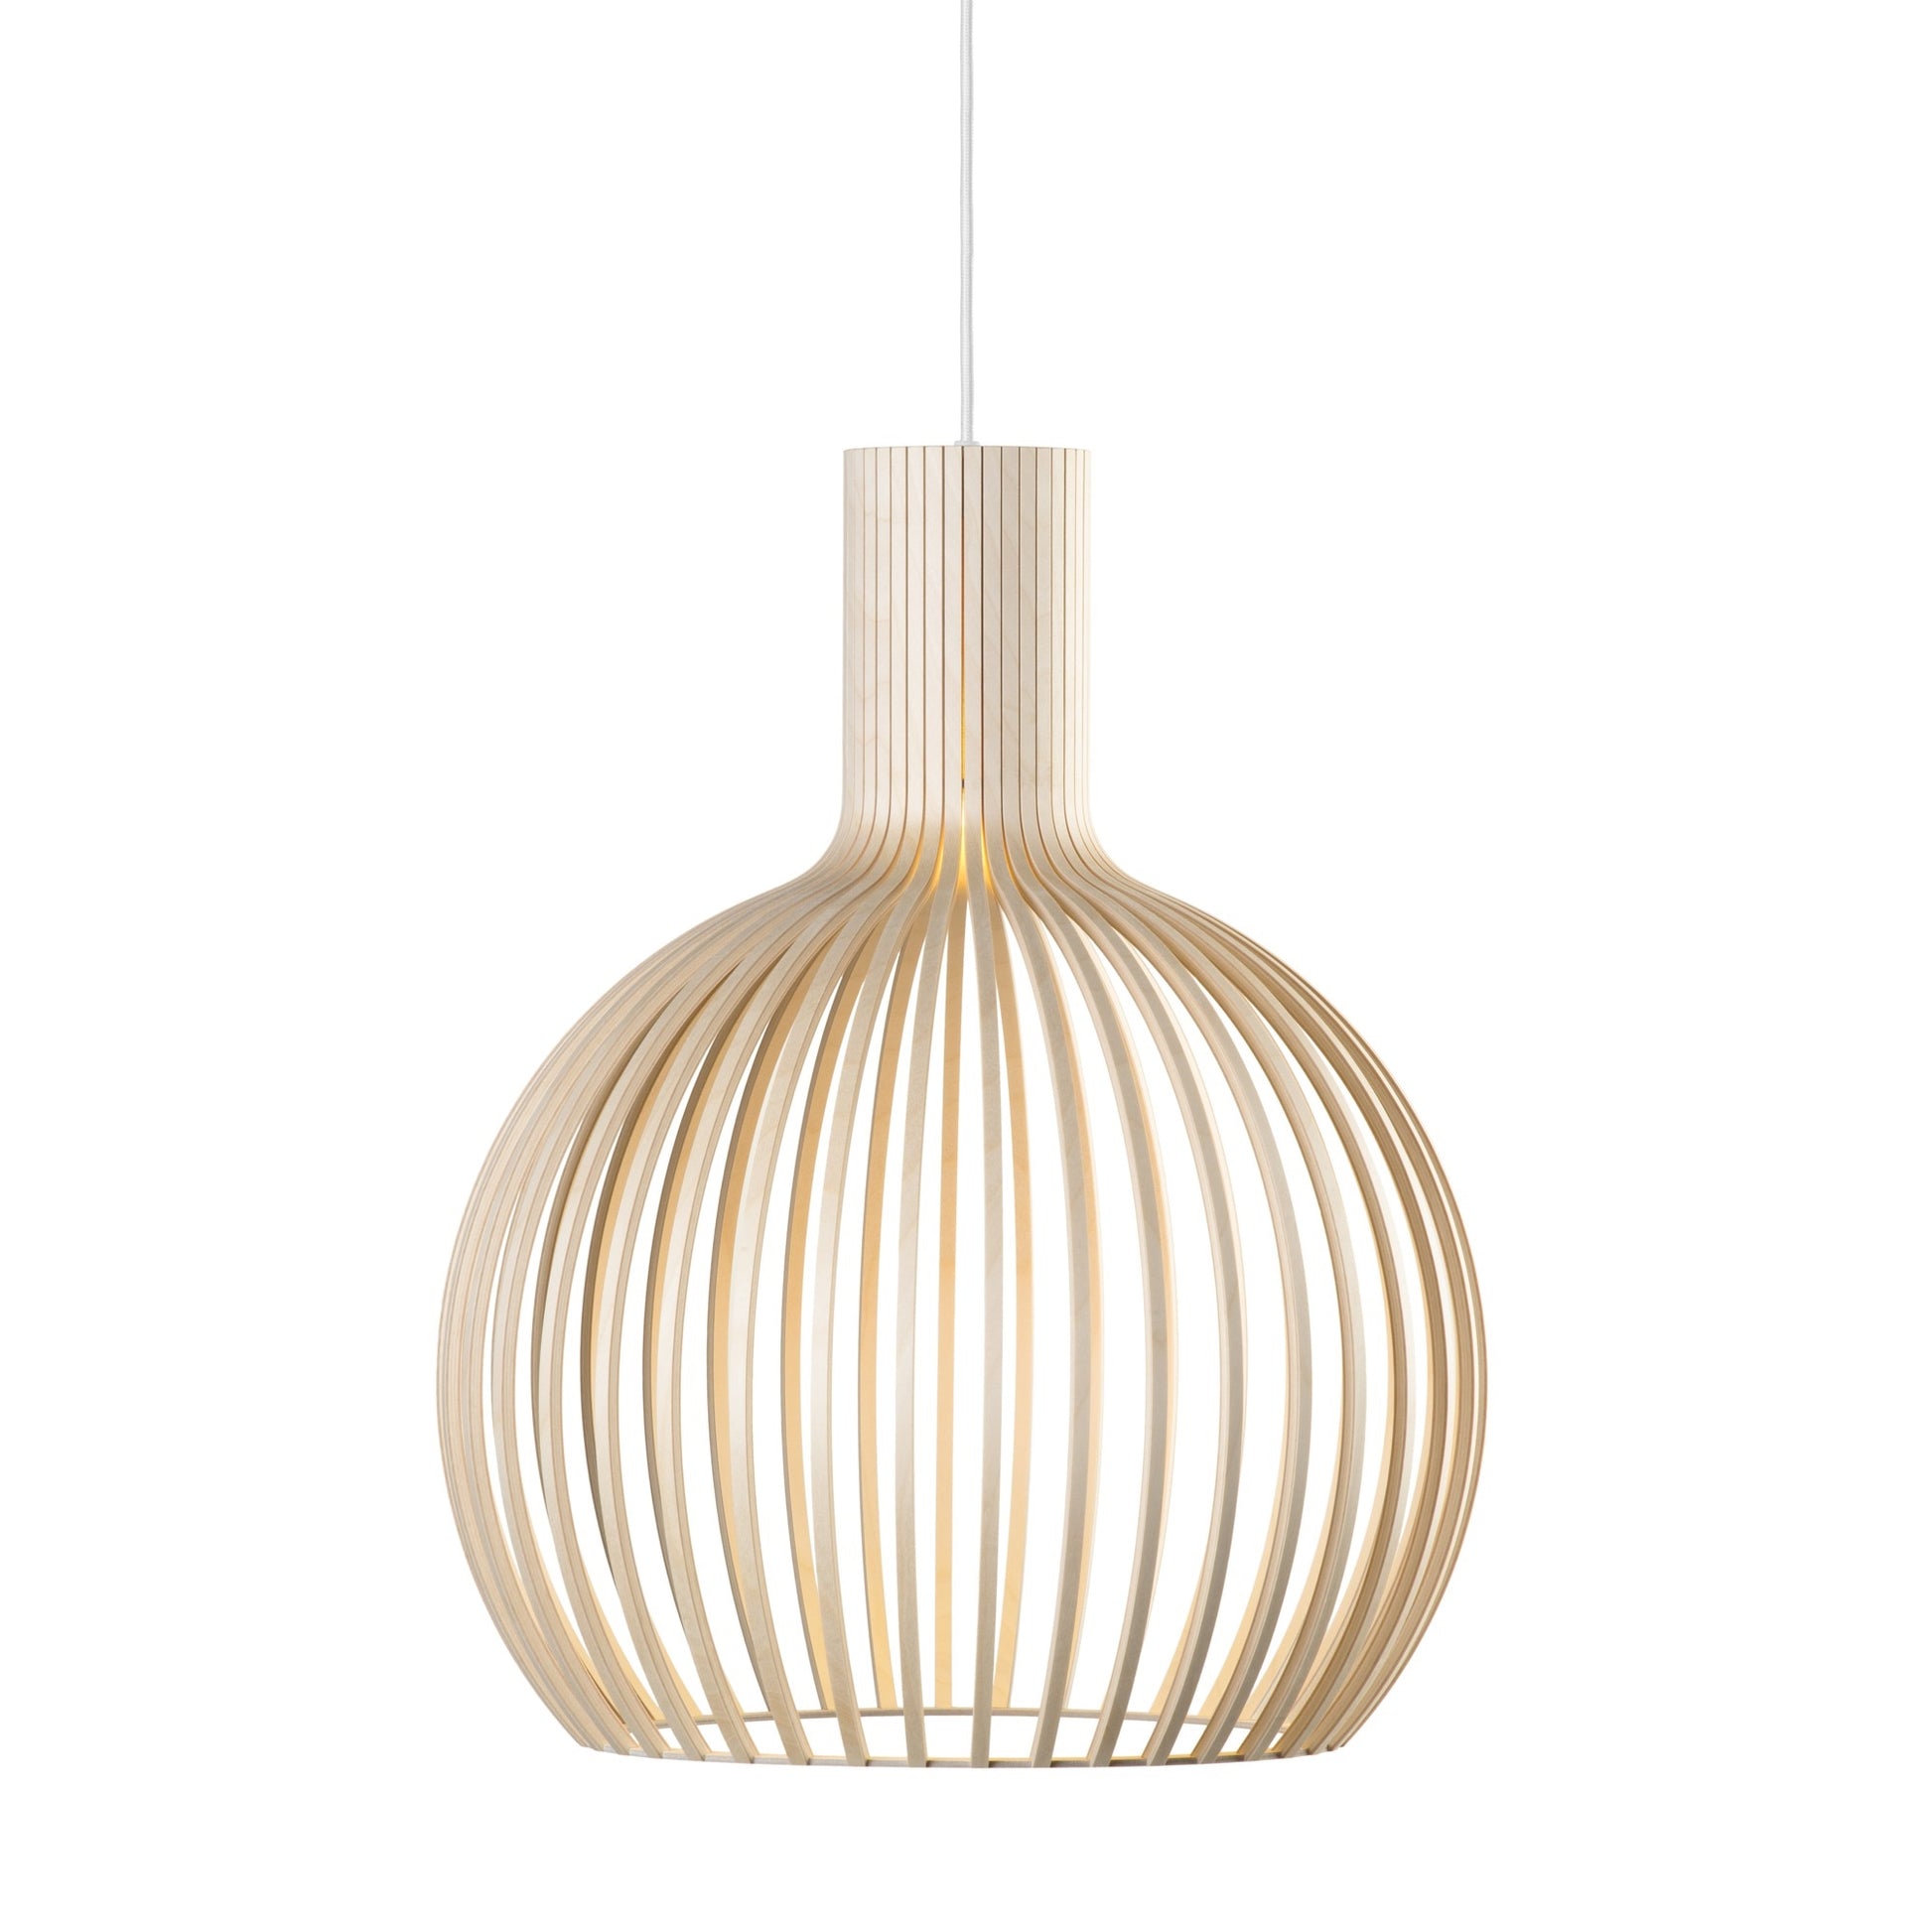 Octo 4241 Pendant Lamp by Secto #Birch